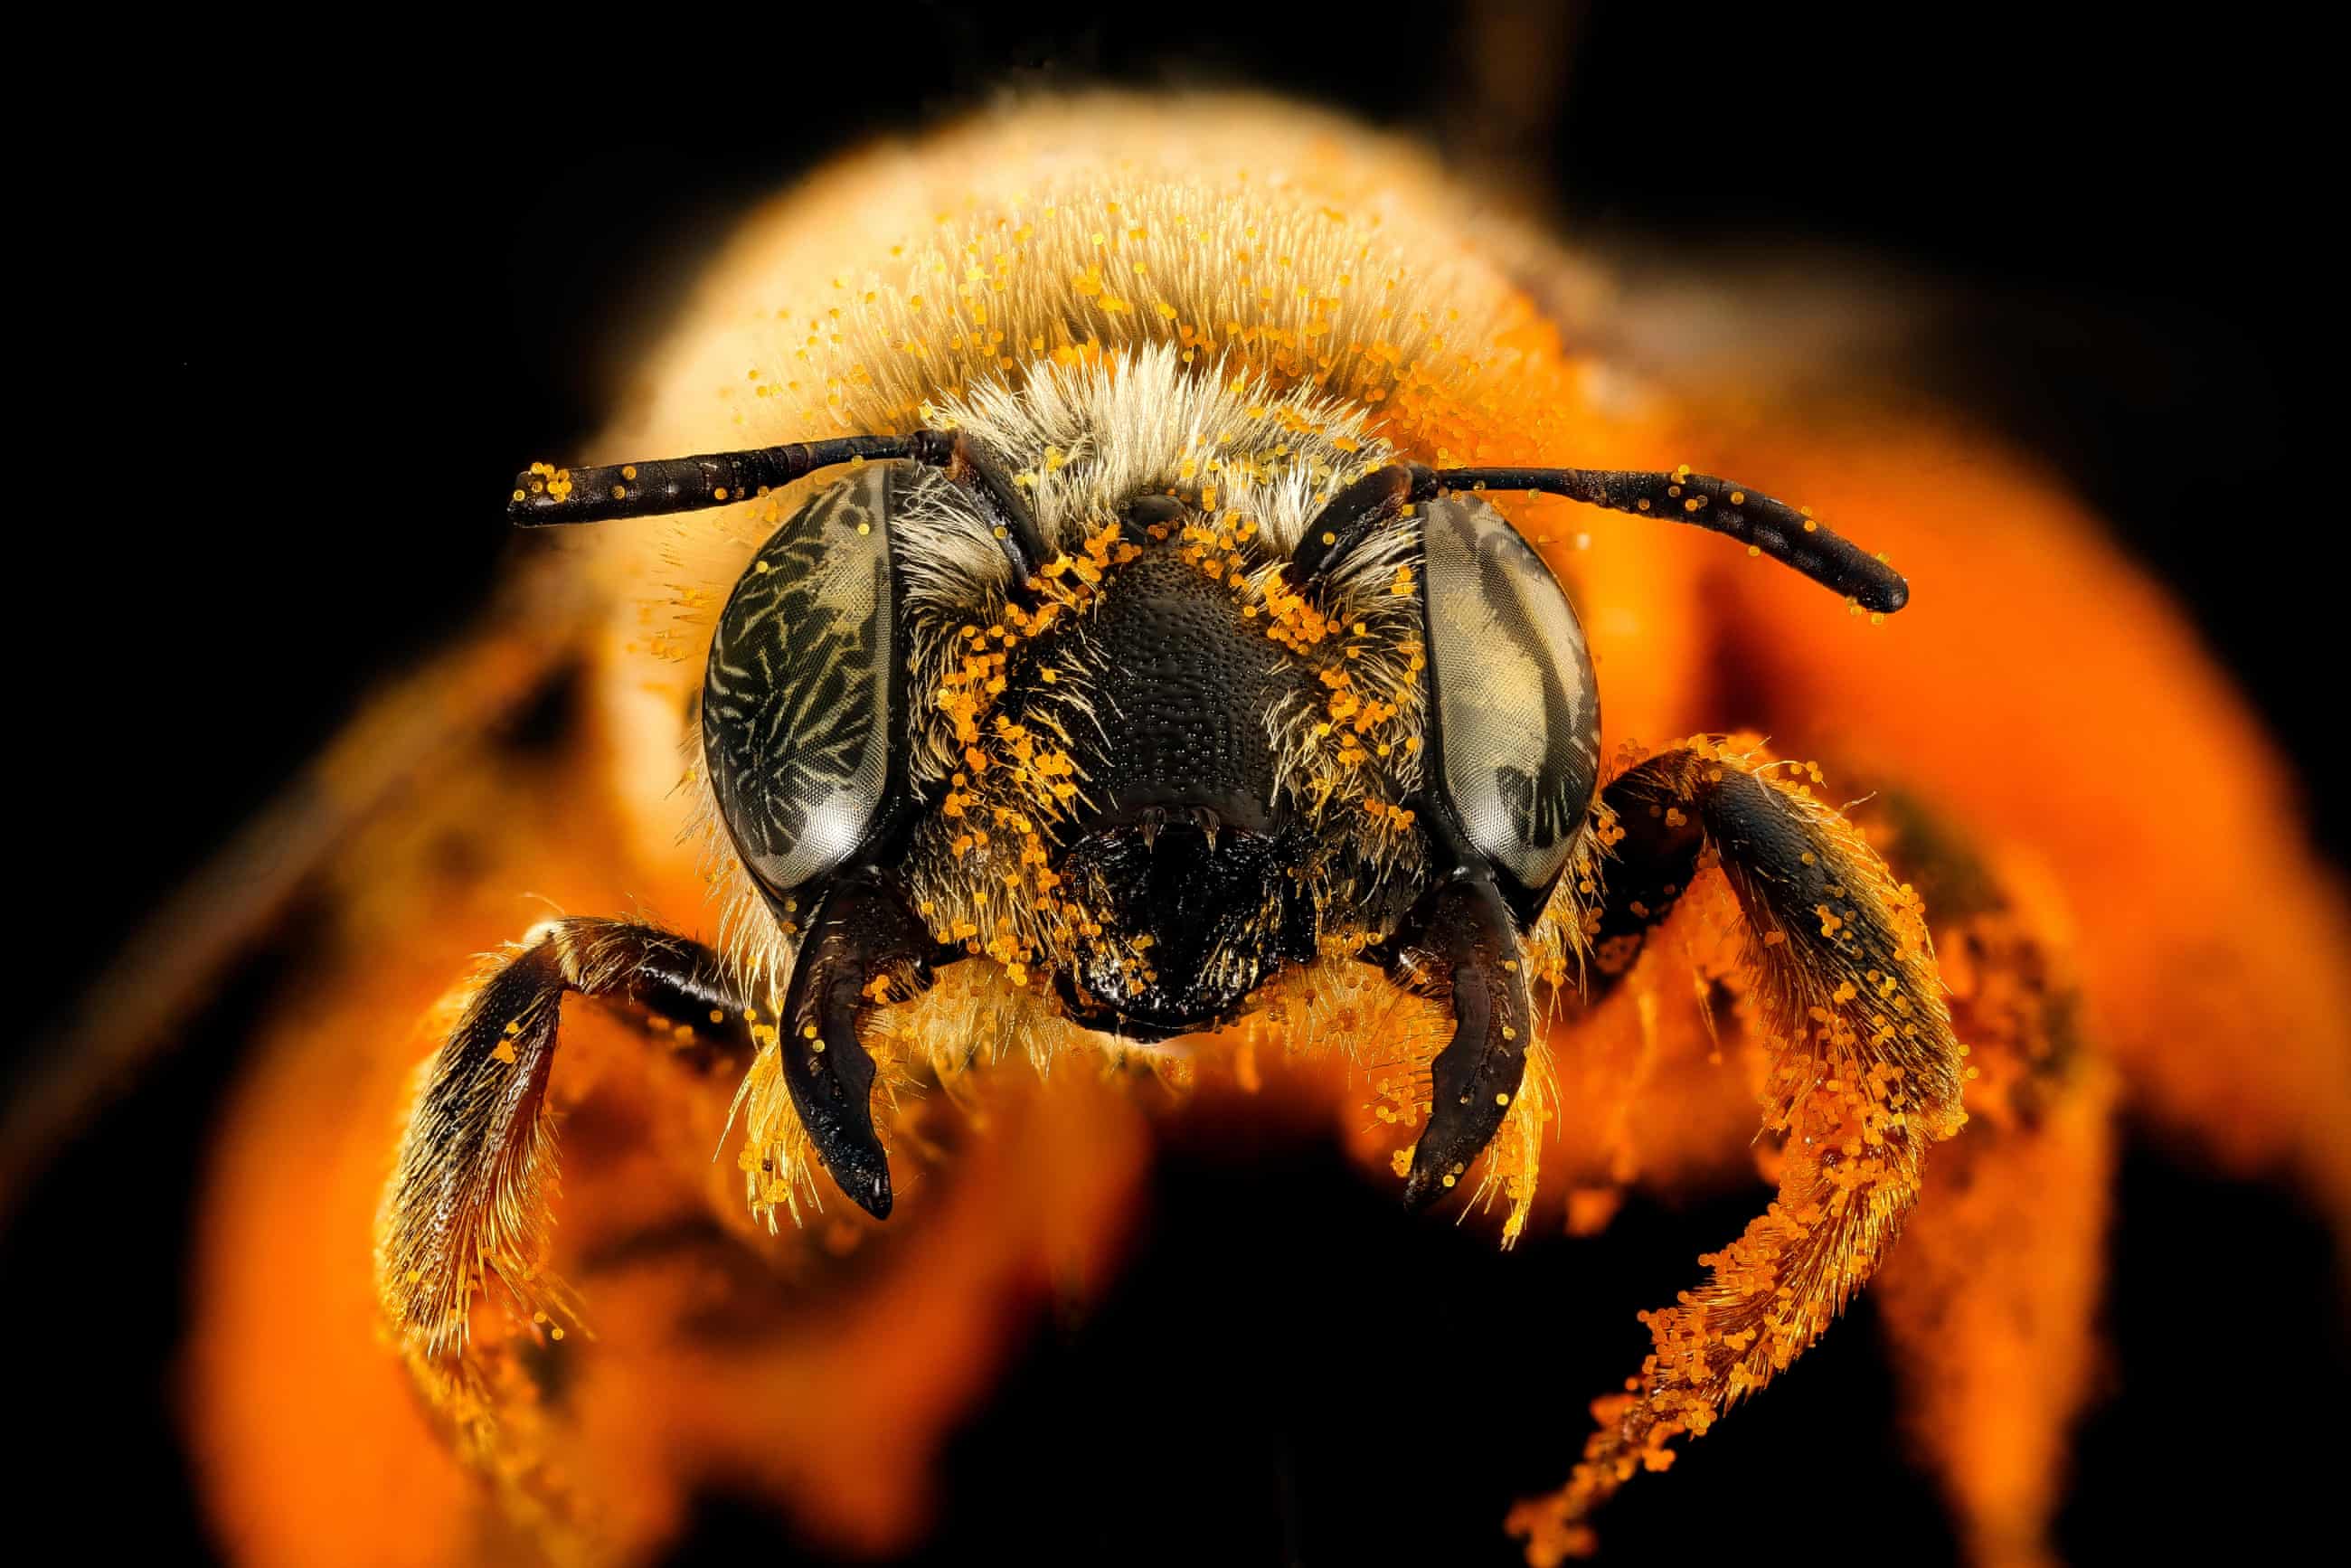 ‘Bees are sentient’: inside the stunning brains of nature’s hardest workers (theguardian.com)